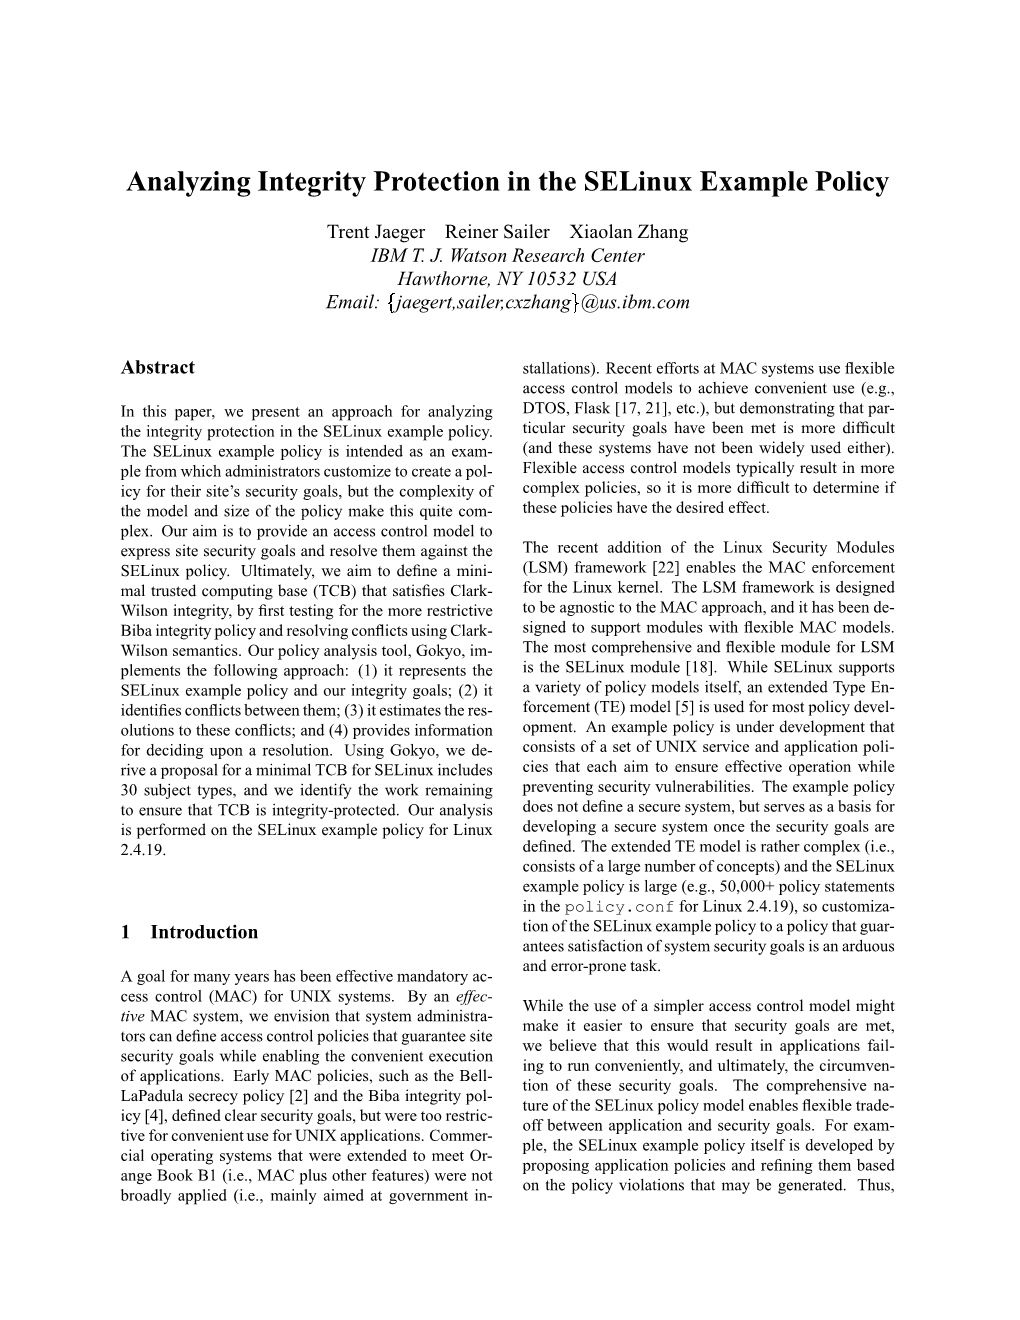 Analyzing Integrity Protection in the Selinux Example Policy